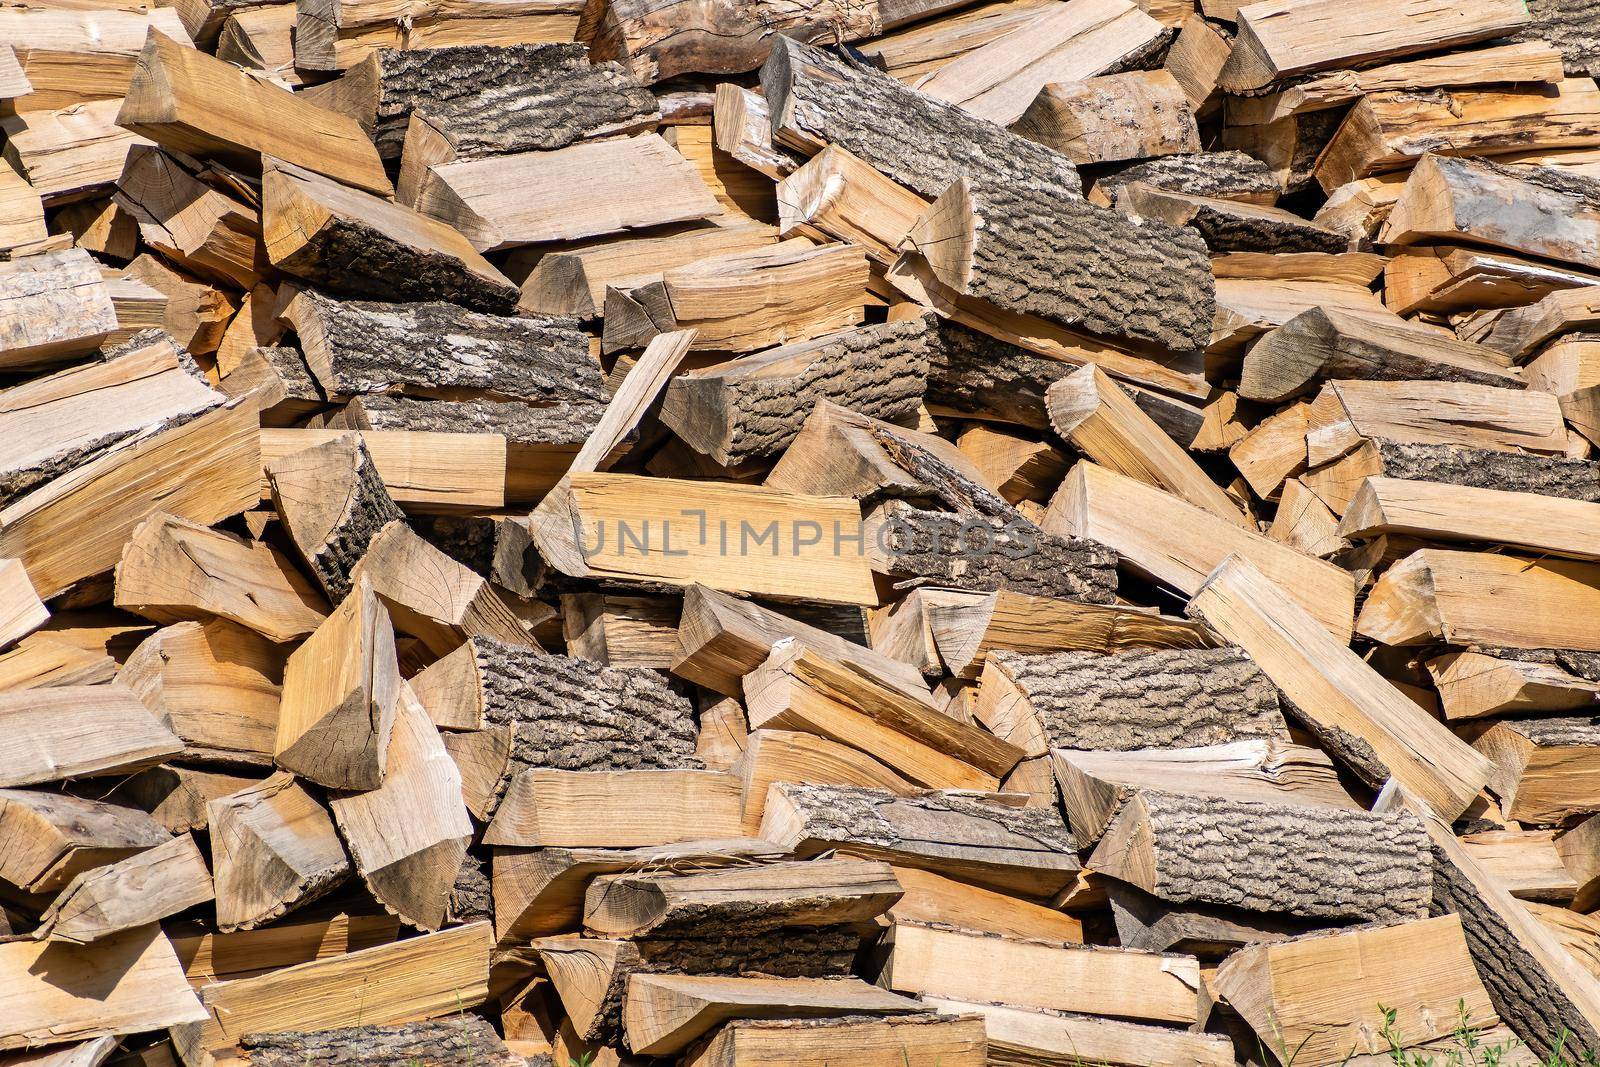 Texture, background for further work. A large pile of chopped firewood for the winter